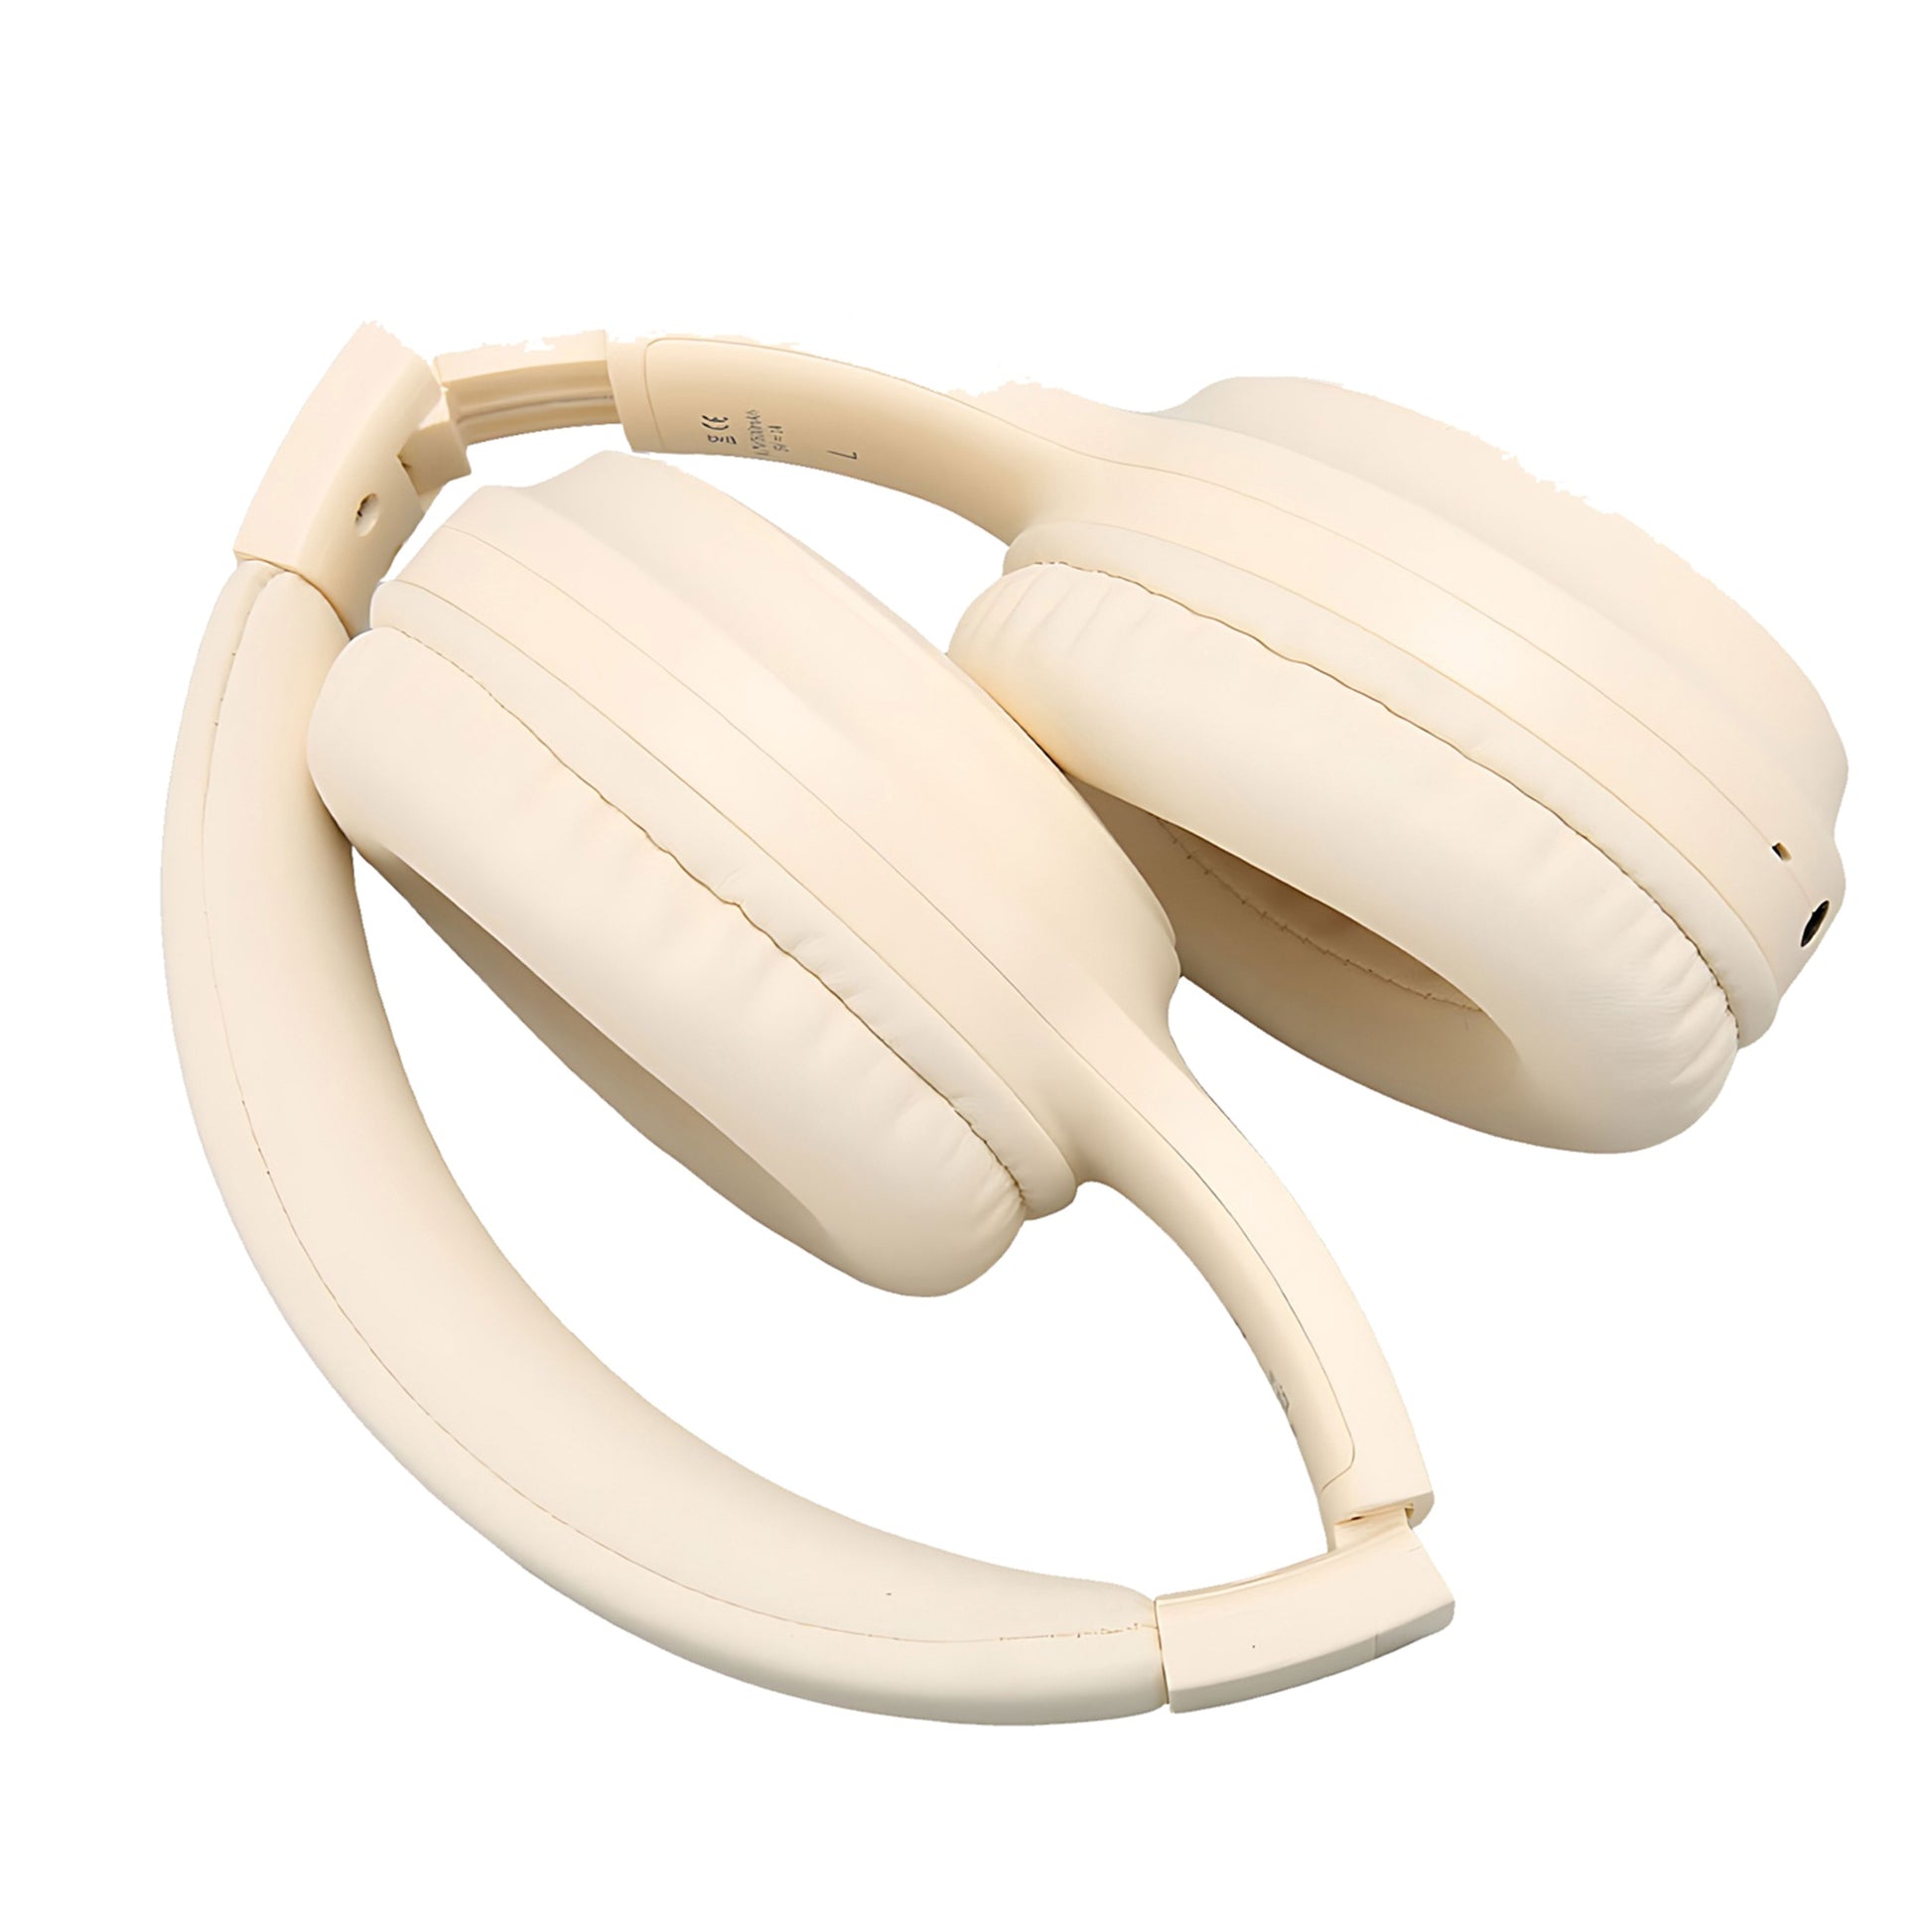 A Close up view of folded Faster S5 white ANC Over-Ear Wireless Headphones